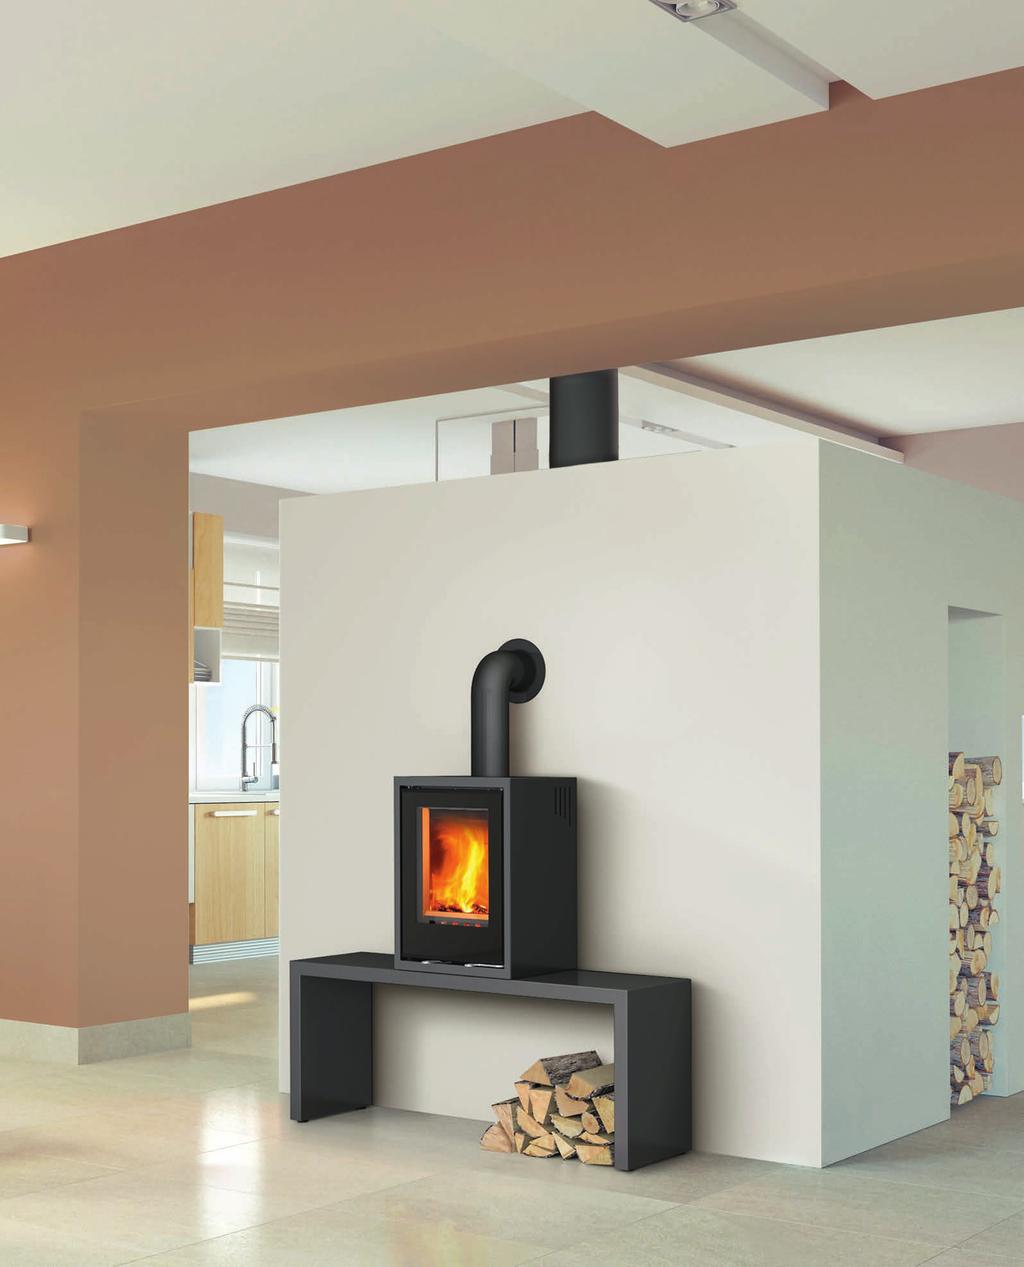 LINEAR Modue X With the sma LINEAR Modue X stove, a traditiona unused firepace can be turned into a powerfu heat source in no time at a.